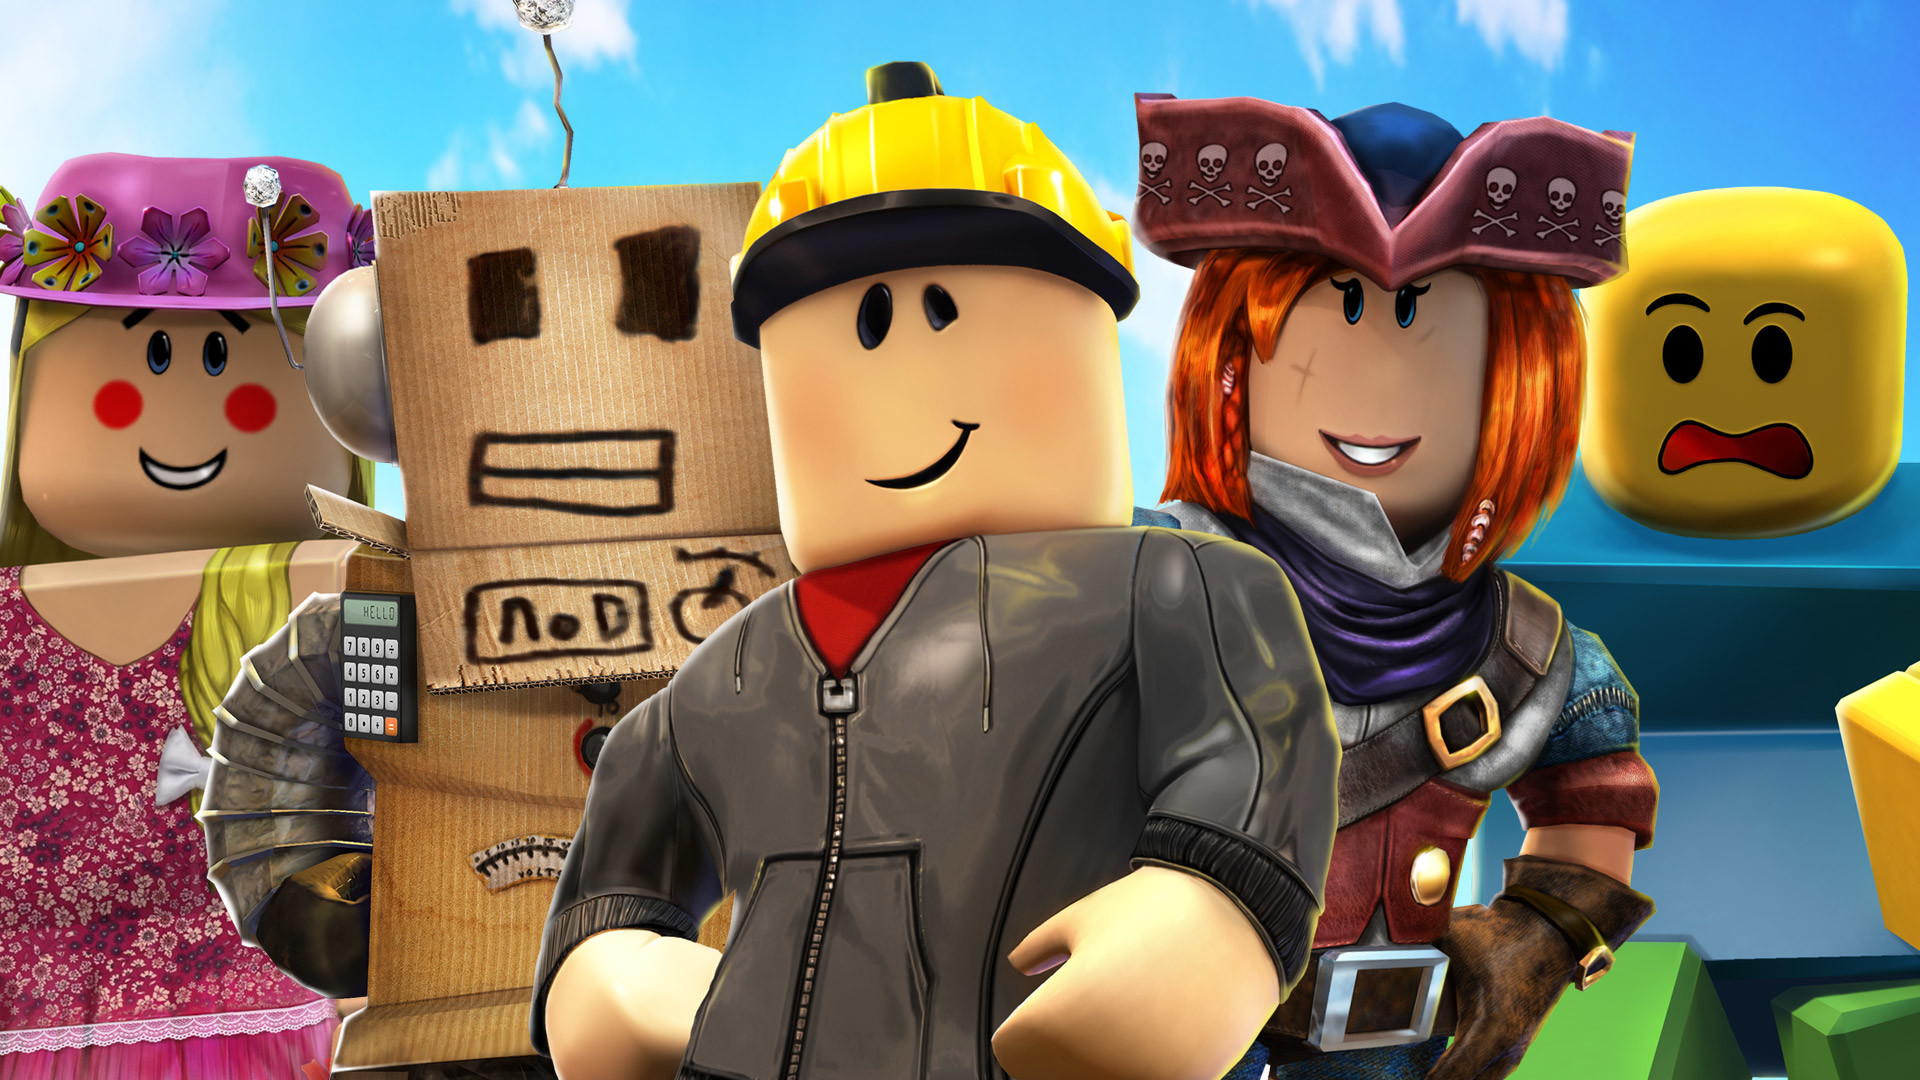 Roblox Hack Robux 2020 - roblox promocode gives you 100 million free robux free